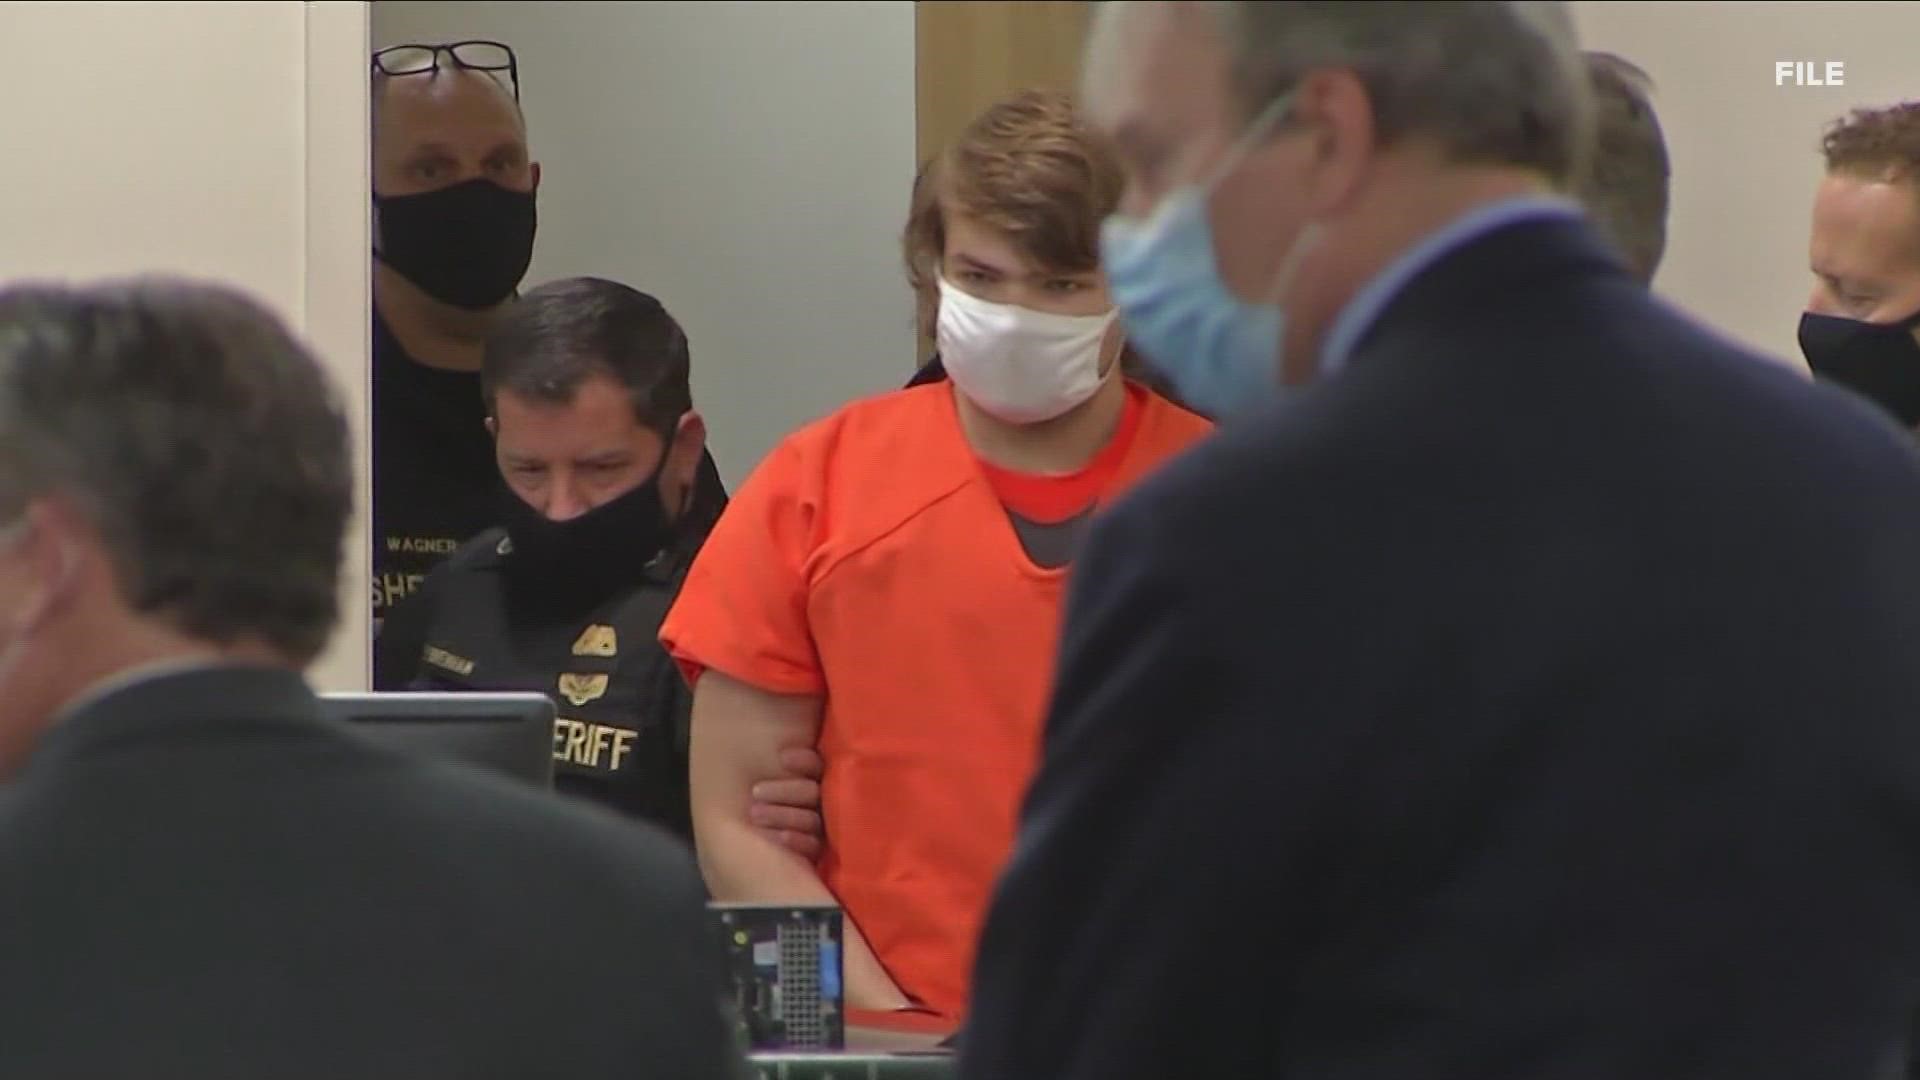 Payton Gendron was scheduled to be in court today to plead guilty to 25 state charges related to the shooting on May 14-th that killed ten people and injured three